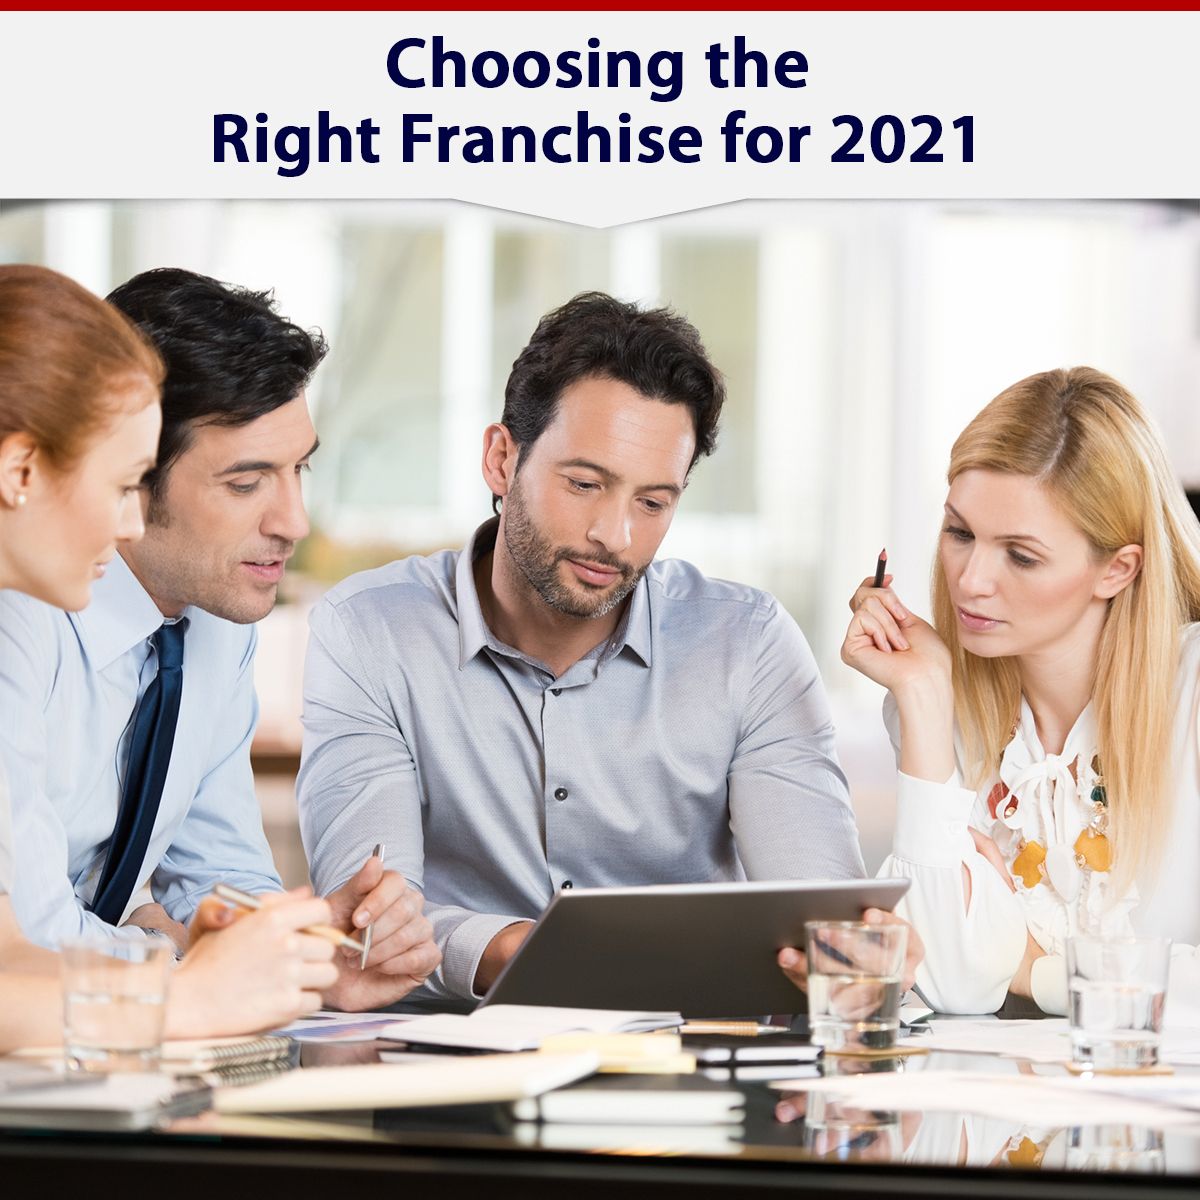 Choosing the Right Franchise for 2021